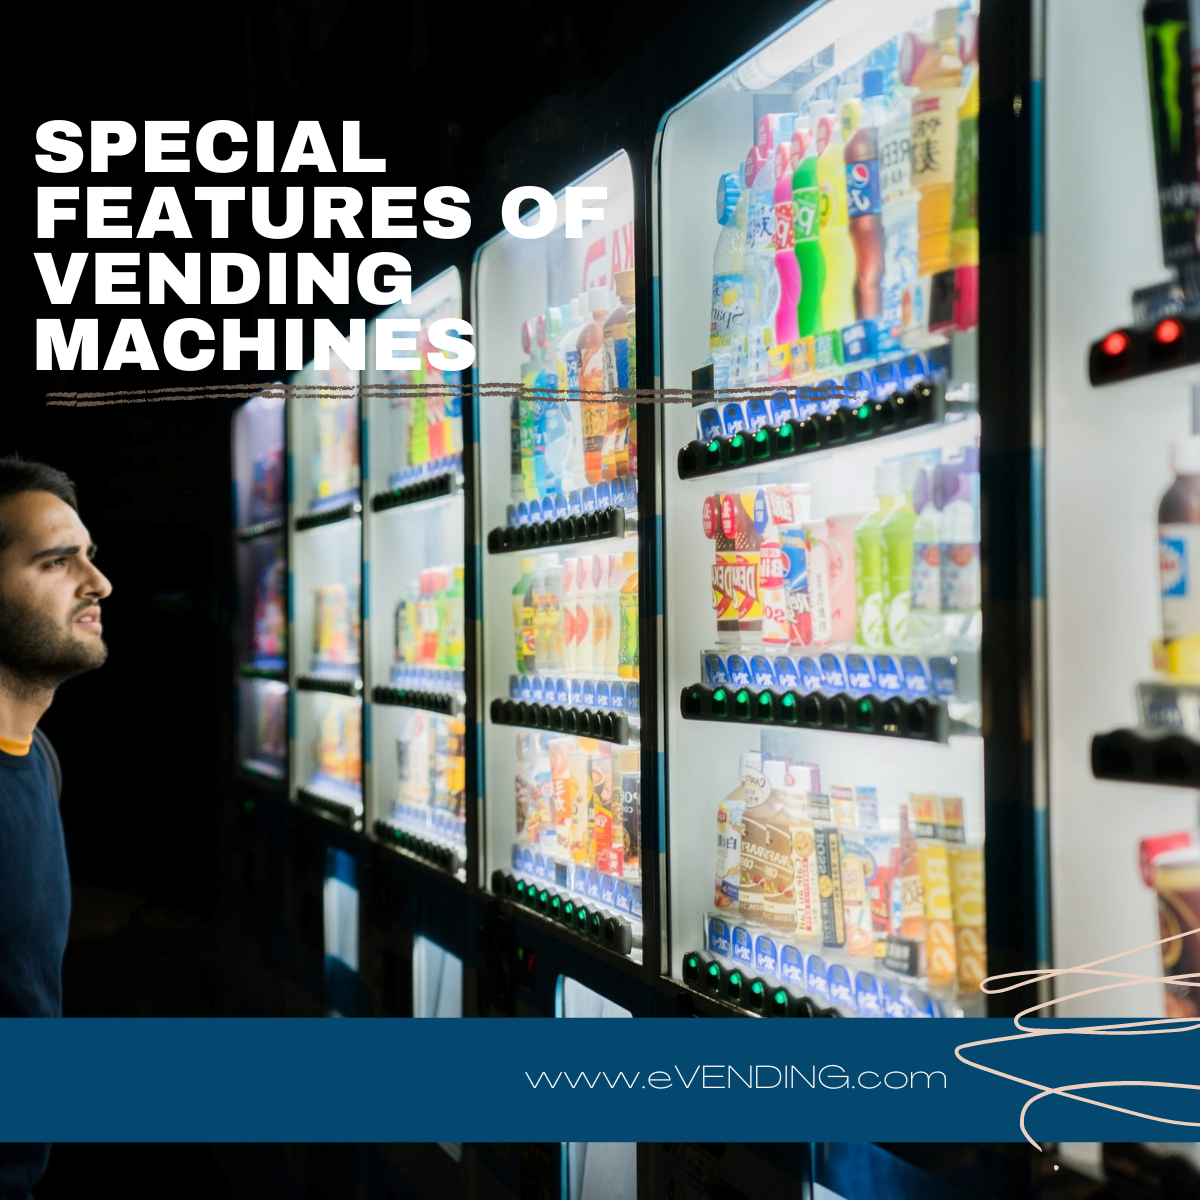 5 MUST-HAVE FEATURES FOR YOUR VENDING MACHINE